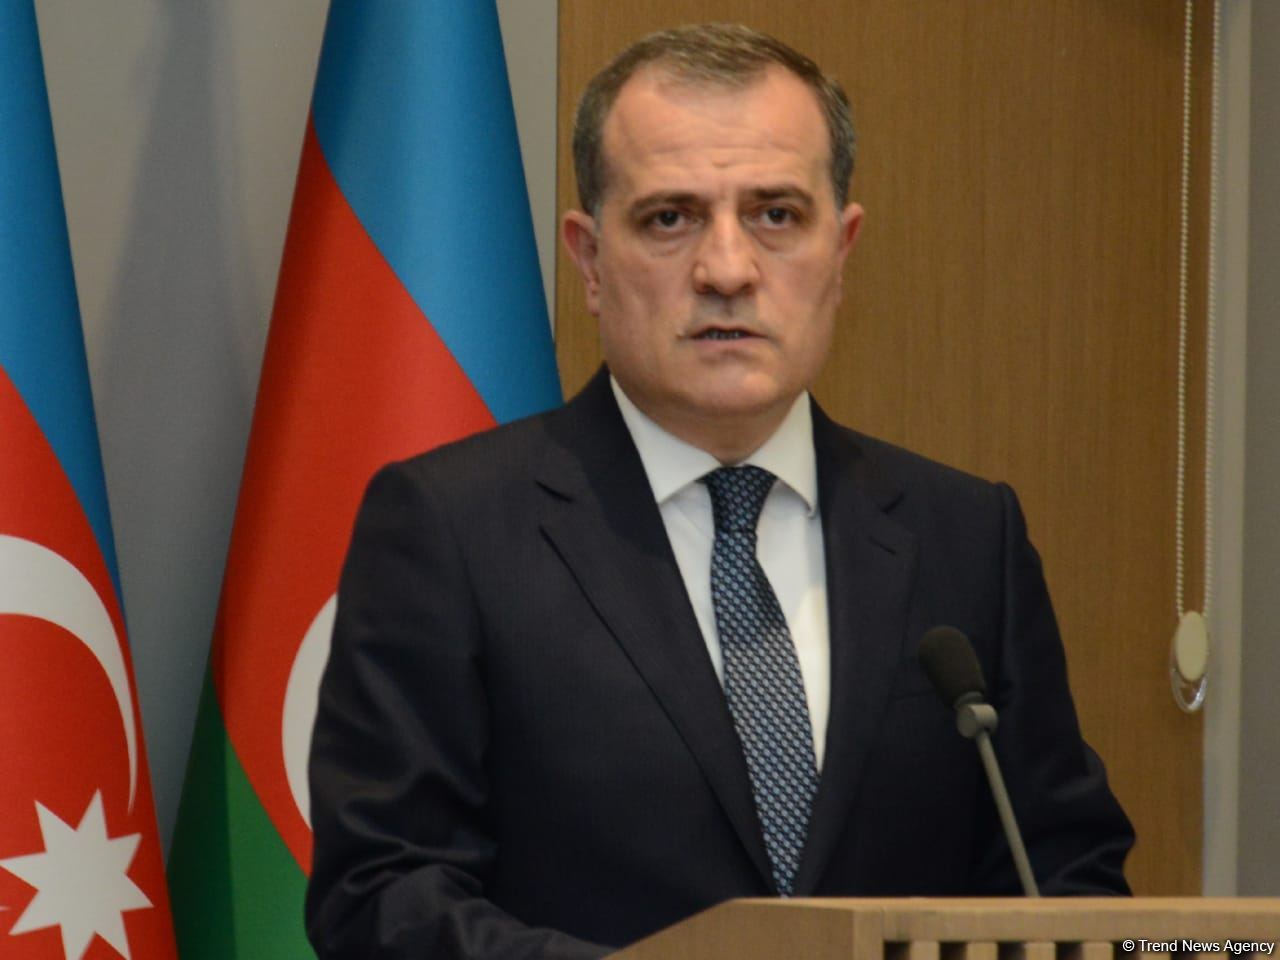 Azerbaijan - supporter of normalization of relations with Armenia, says FM